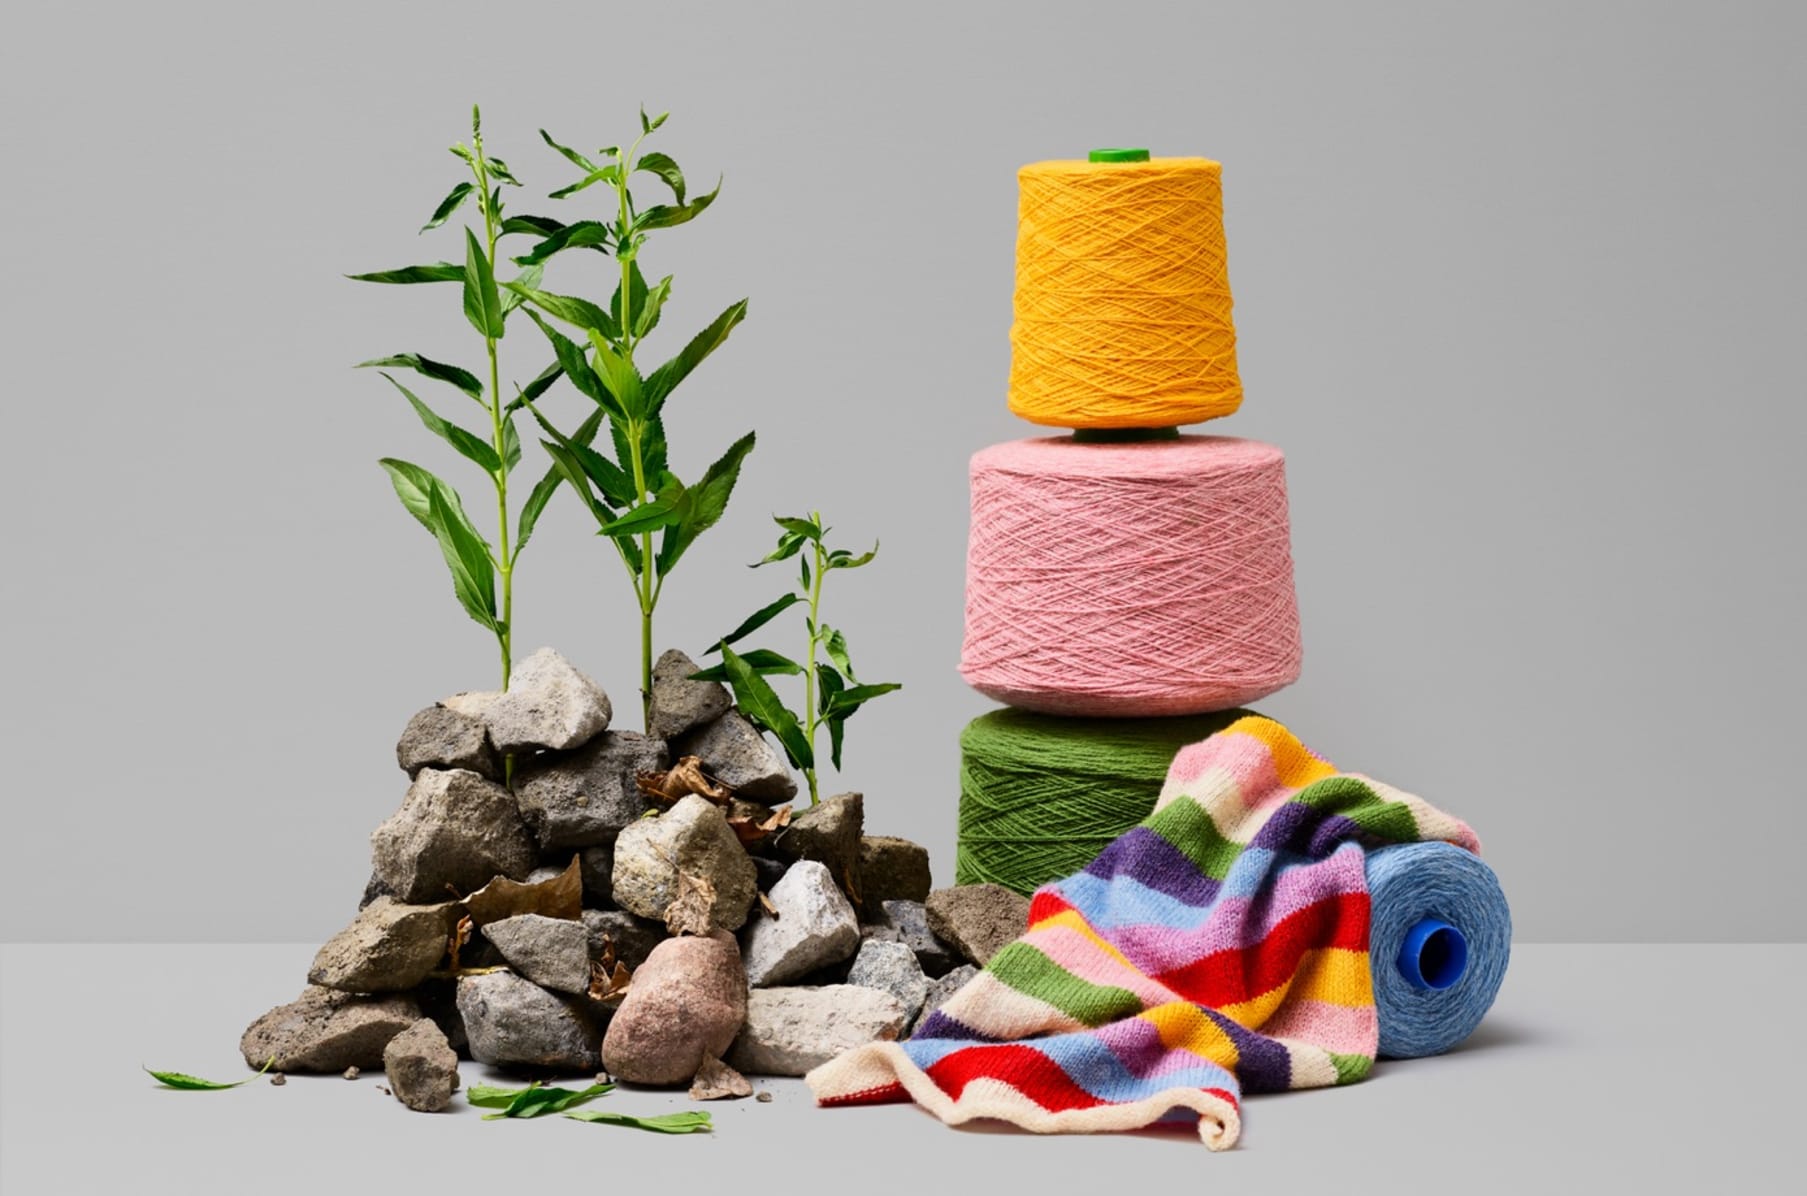 Felt Fabric: Properties, Uses and Care – Green Nettle Textiles